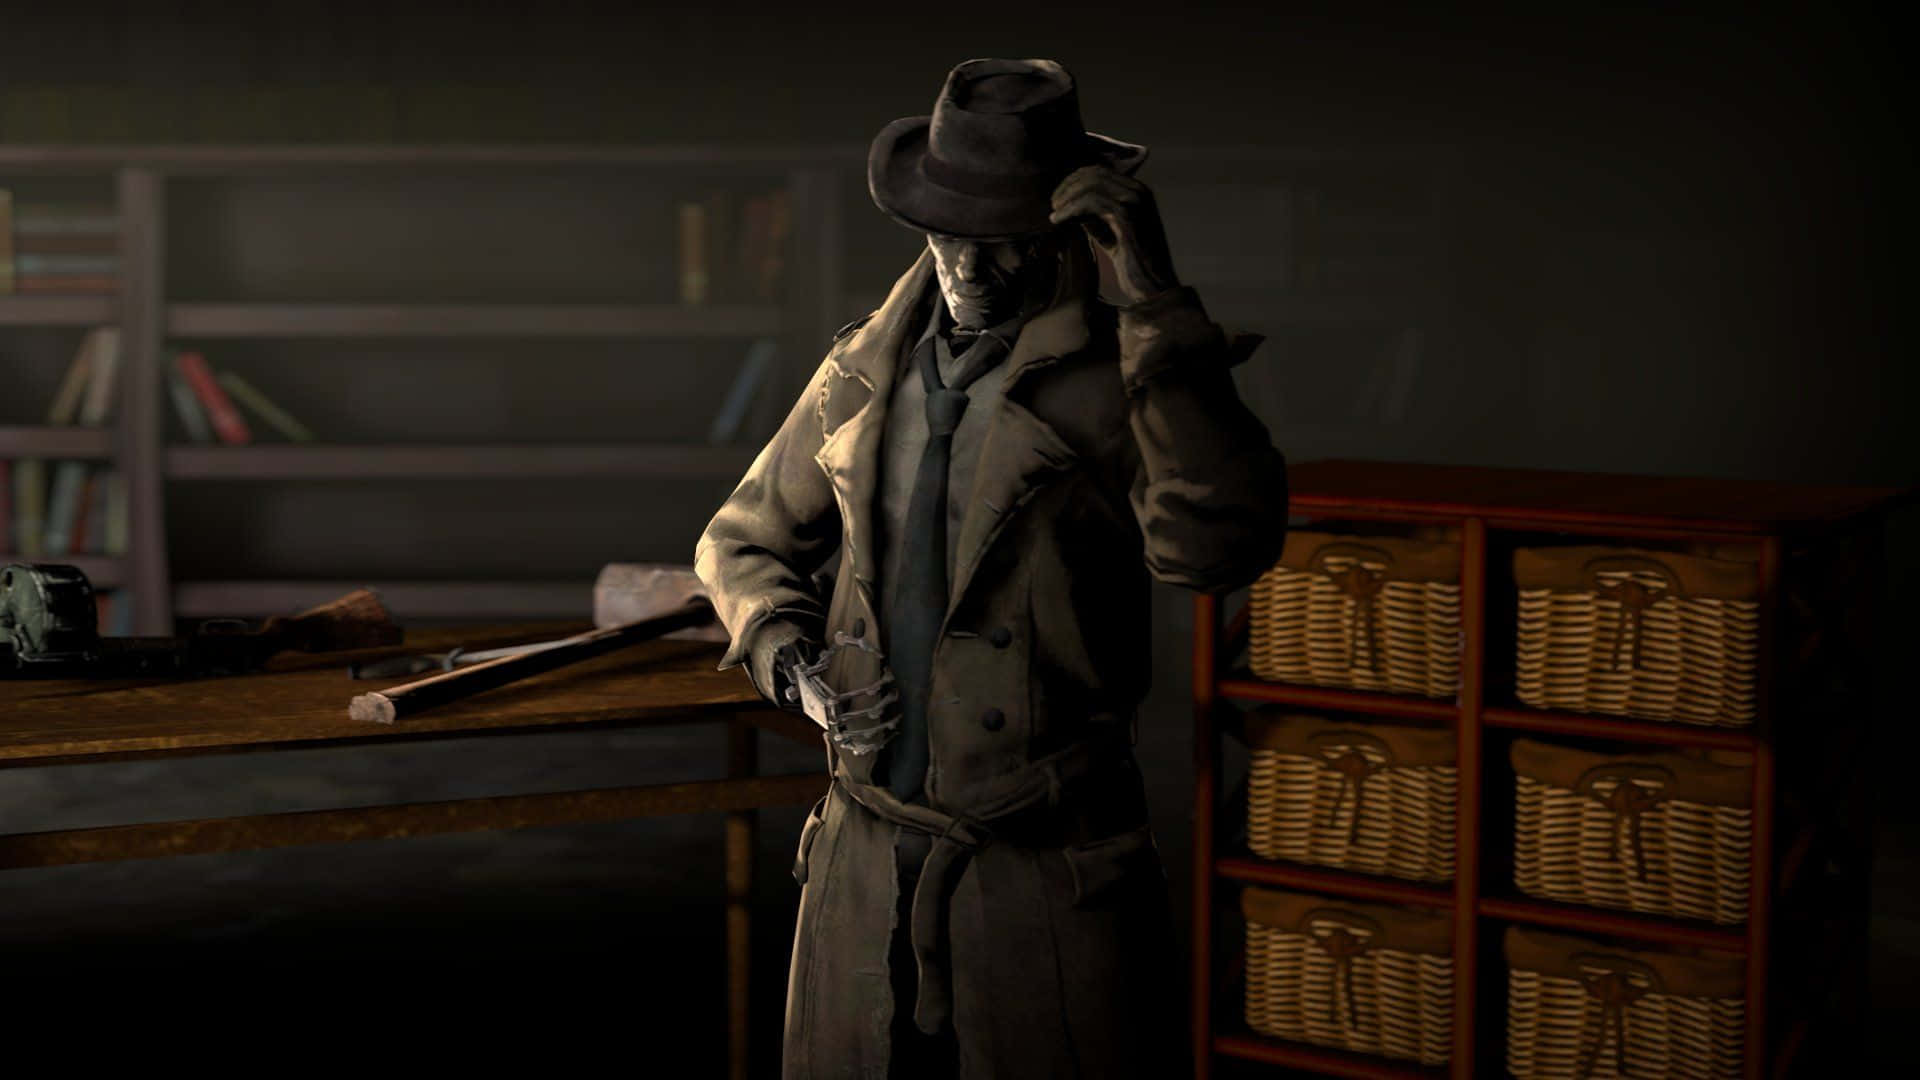 Nick Valentine - A Synth Detective in the Post-Apocalyptic World Wallpaper